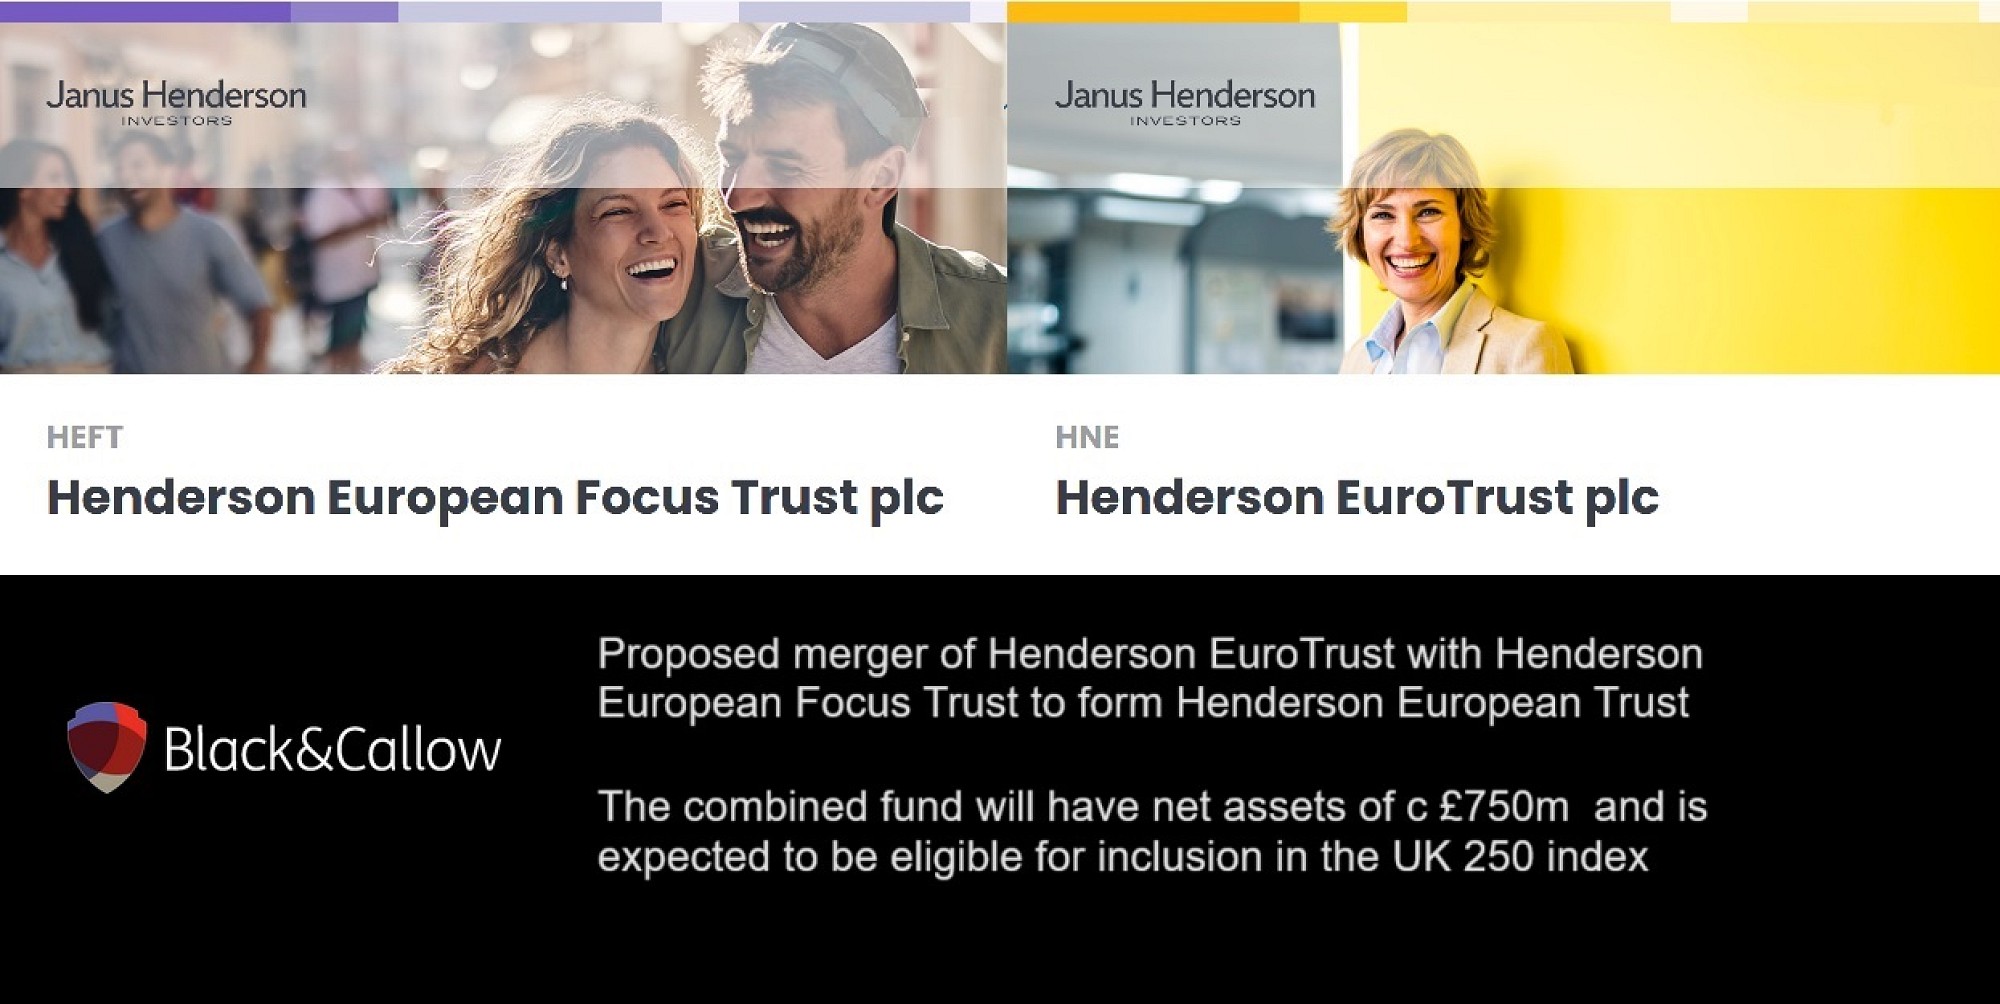 Creating a FTSE 250 investment trust: B&C helps Janus Henderson with HEFT & HNE merger